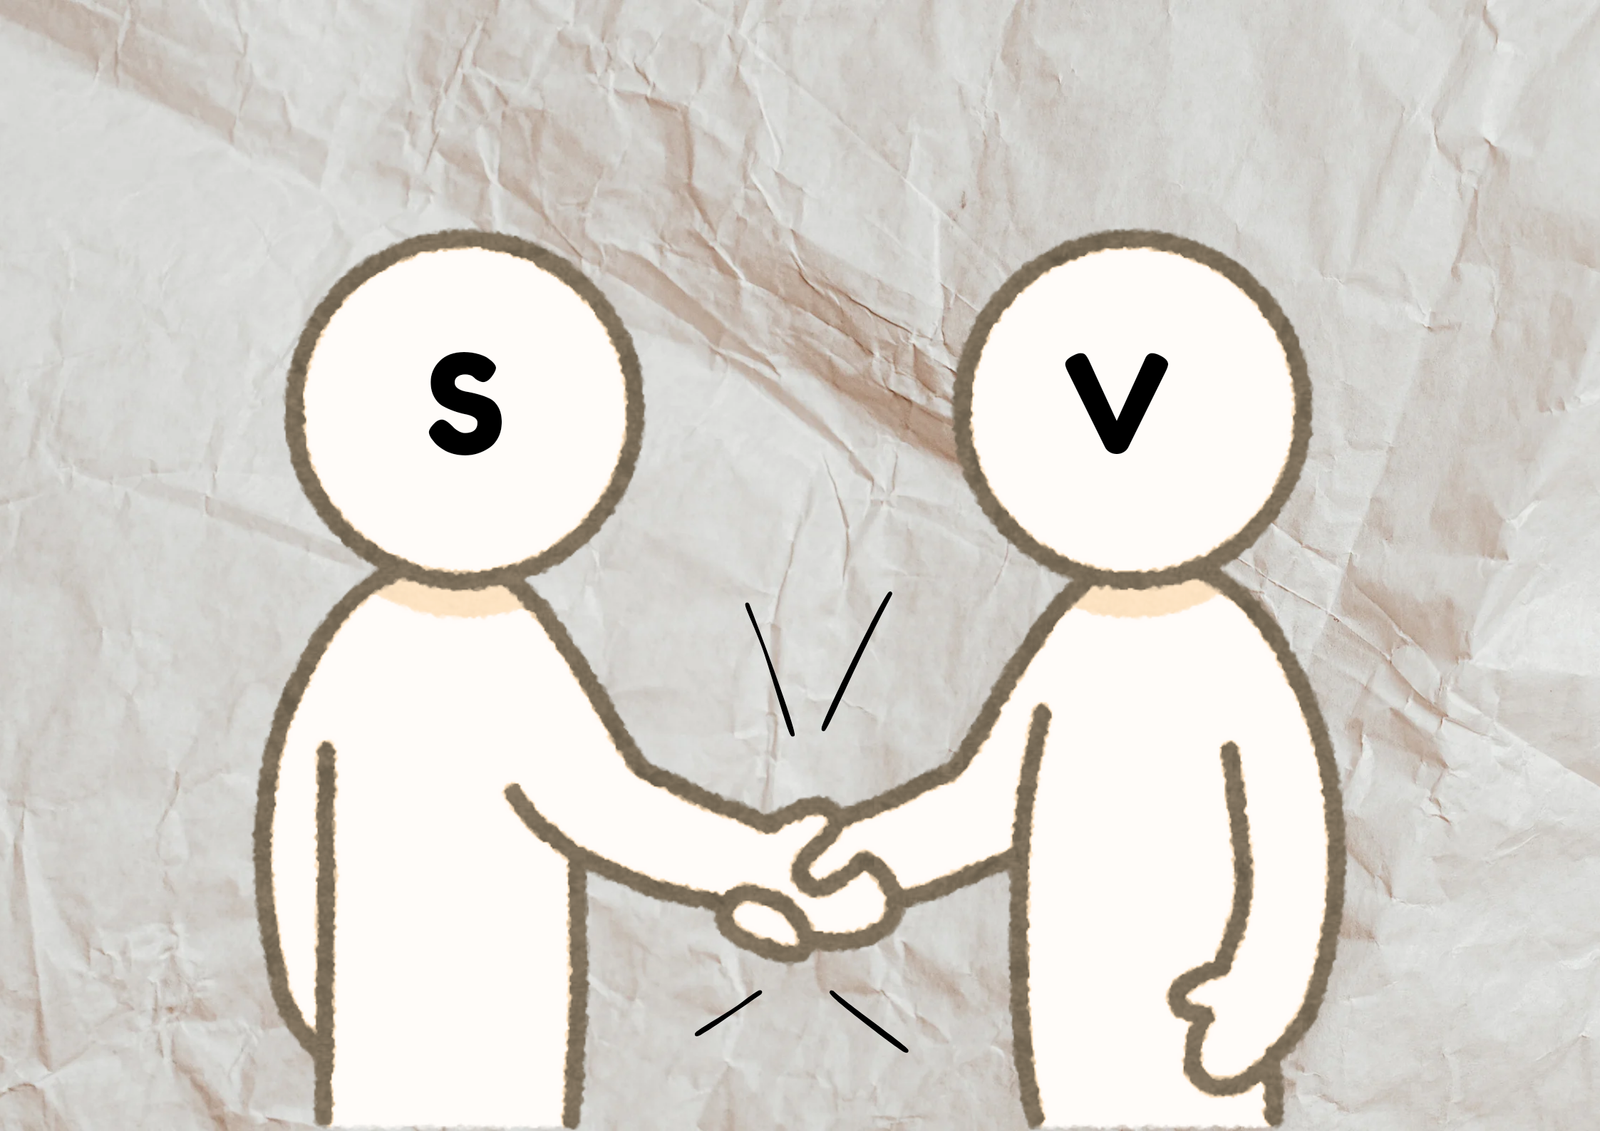 two characters labeled as S as V shaking hands